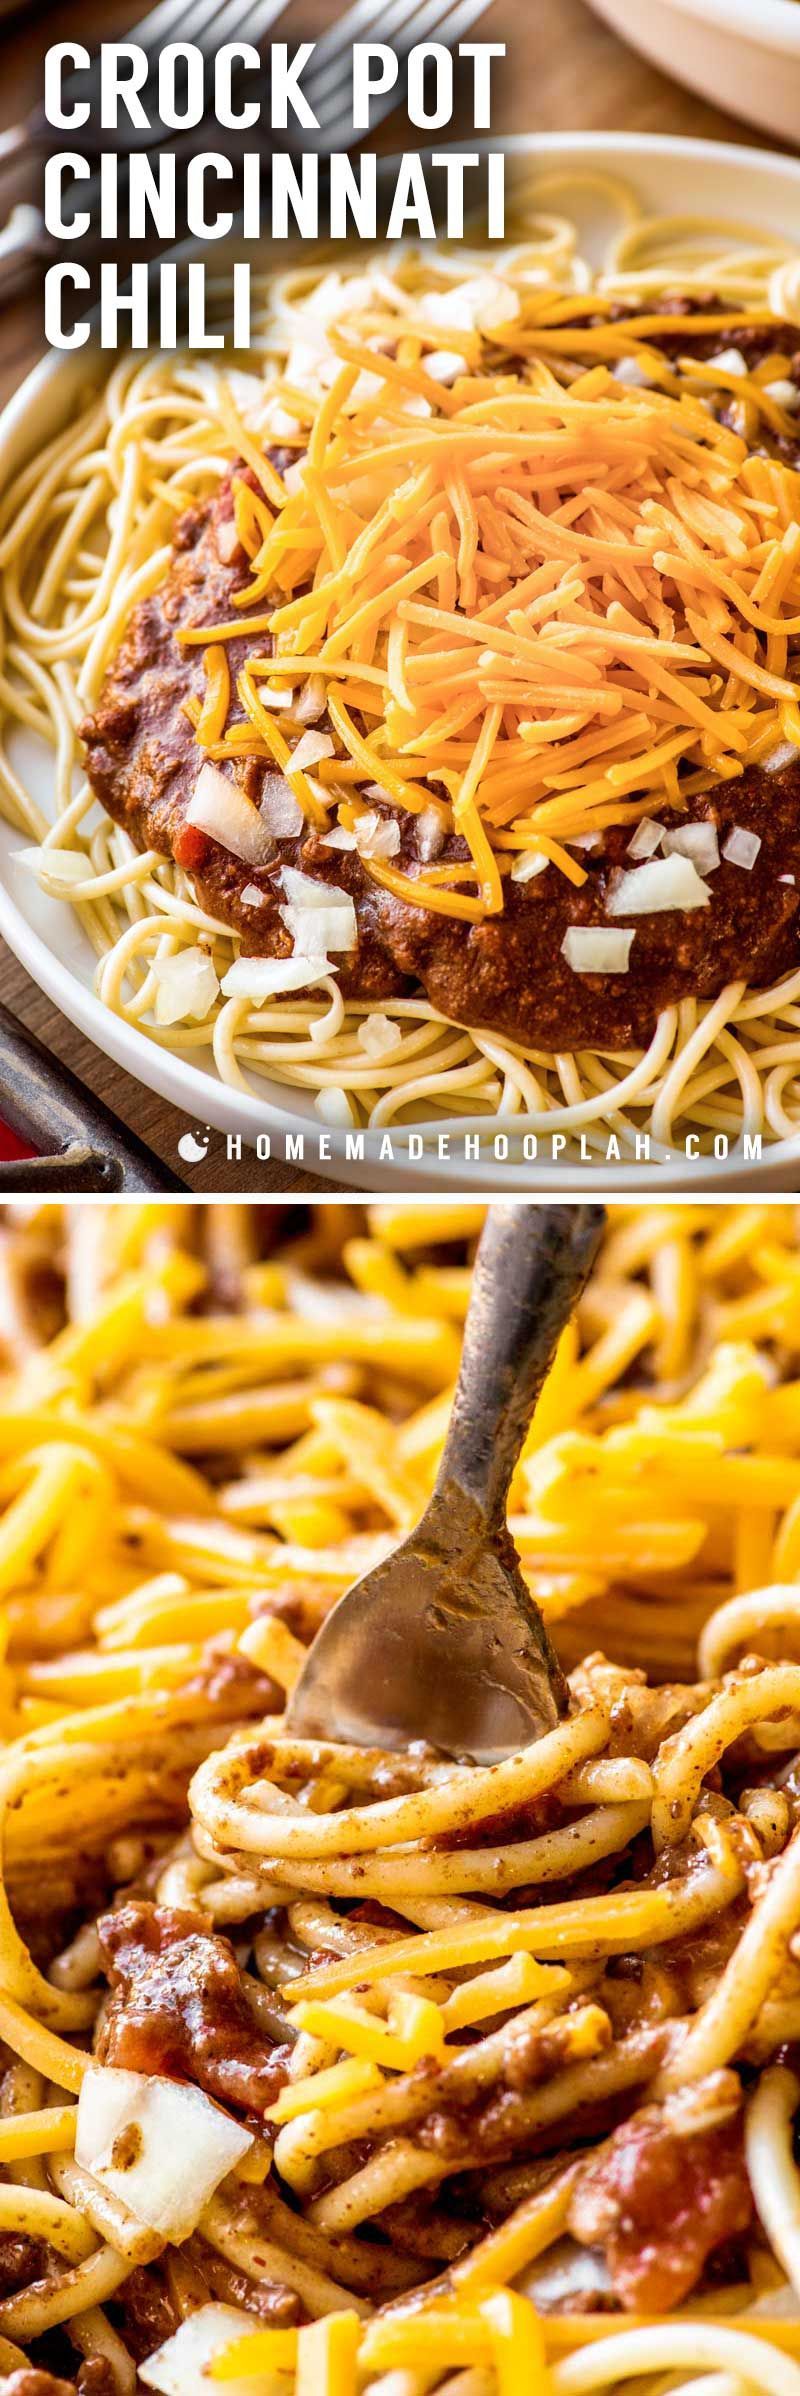 Crock Pot Cincinnati Chili! An Ohio-favorite dish gets the crock pot treatment with this Skyline Chili copycat recipe. Eat like a Cincinnatian with a chili made with hints of cinnamon and chocolate (that's NOT sweet!) and serve it like the locals do using the authentic 